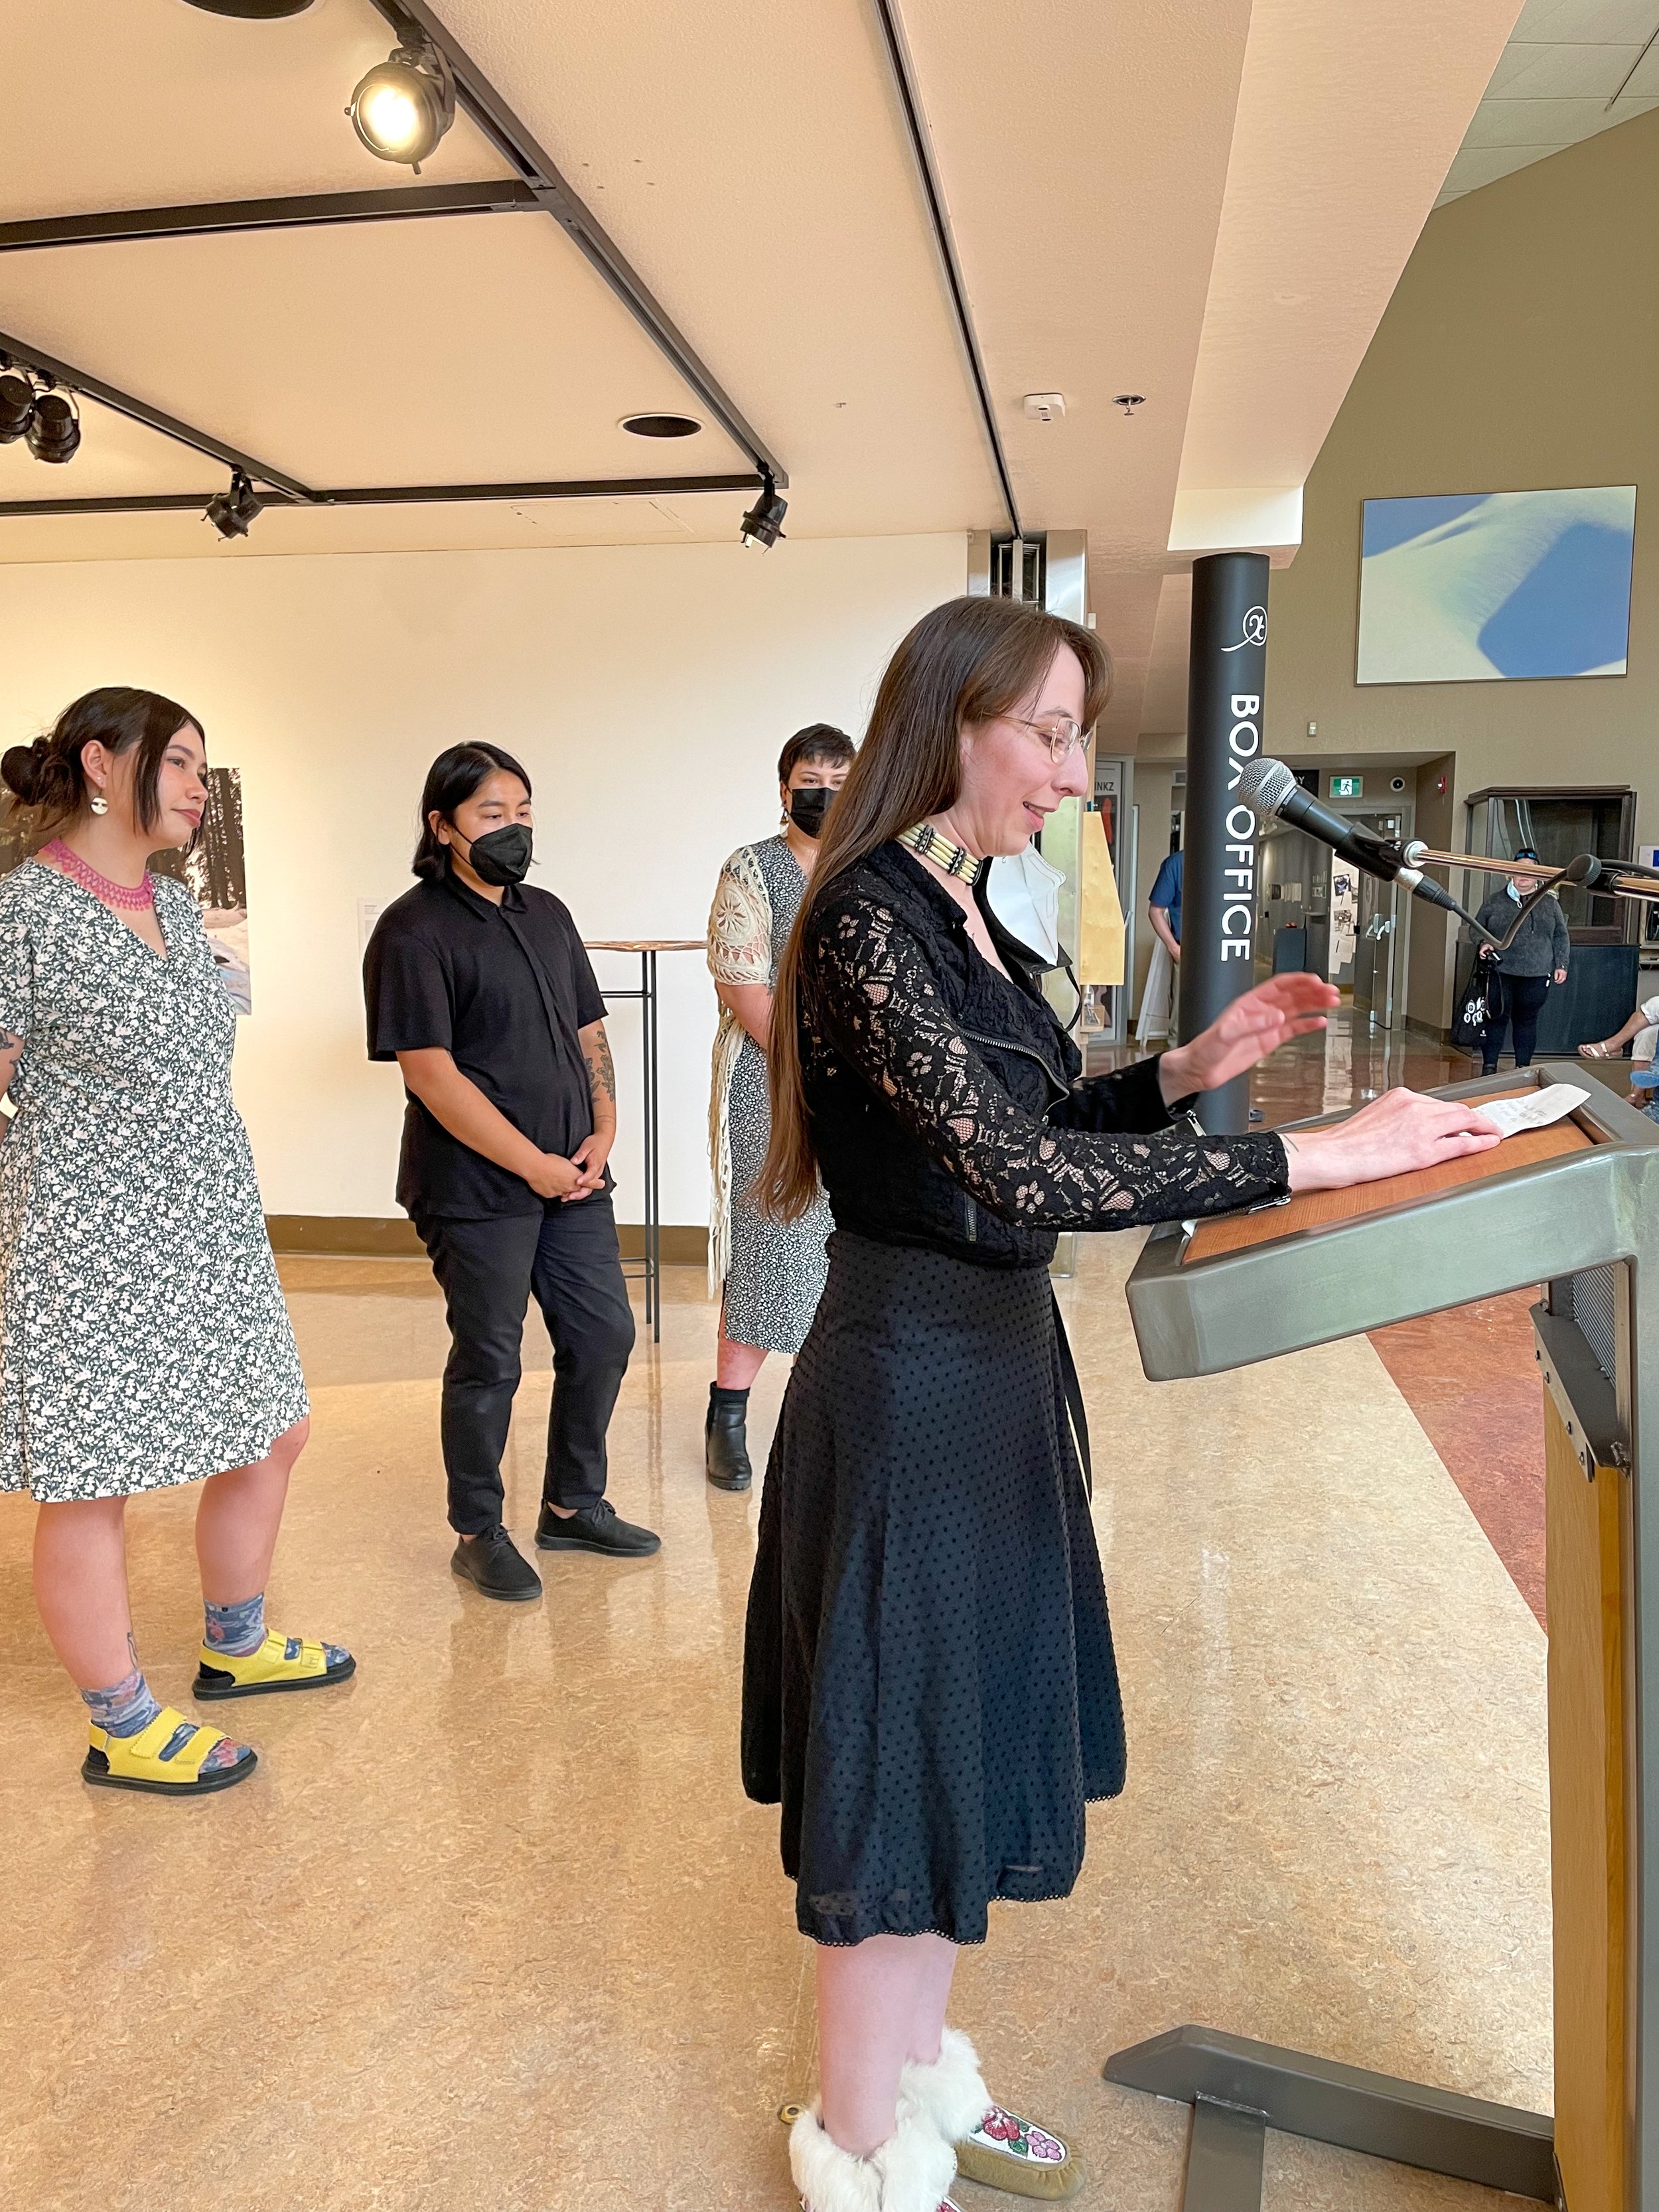  Co-curator Teresa Vander Meer-Chassé speaking at the opening of  TETHER , Yukon Arts Centre, Whitehorse, YK, July 2022. Photo courtesy of Yukon Arts Centre. 